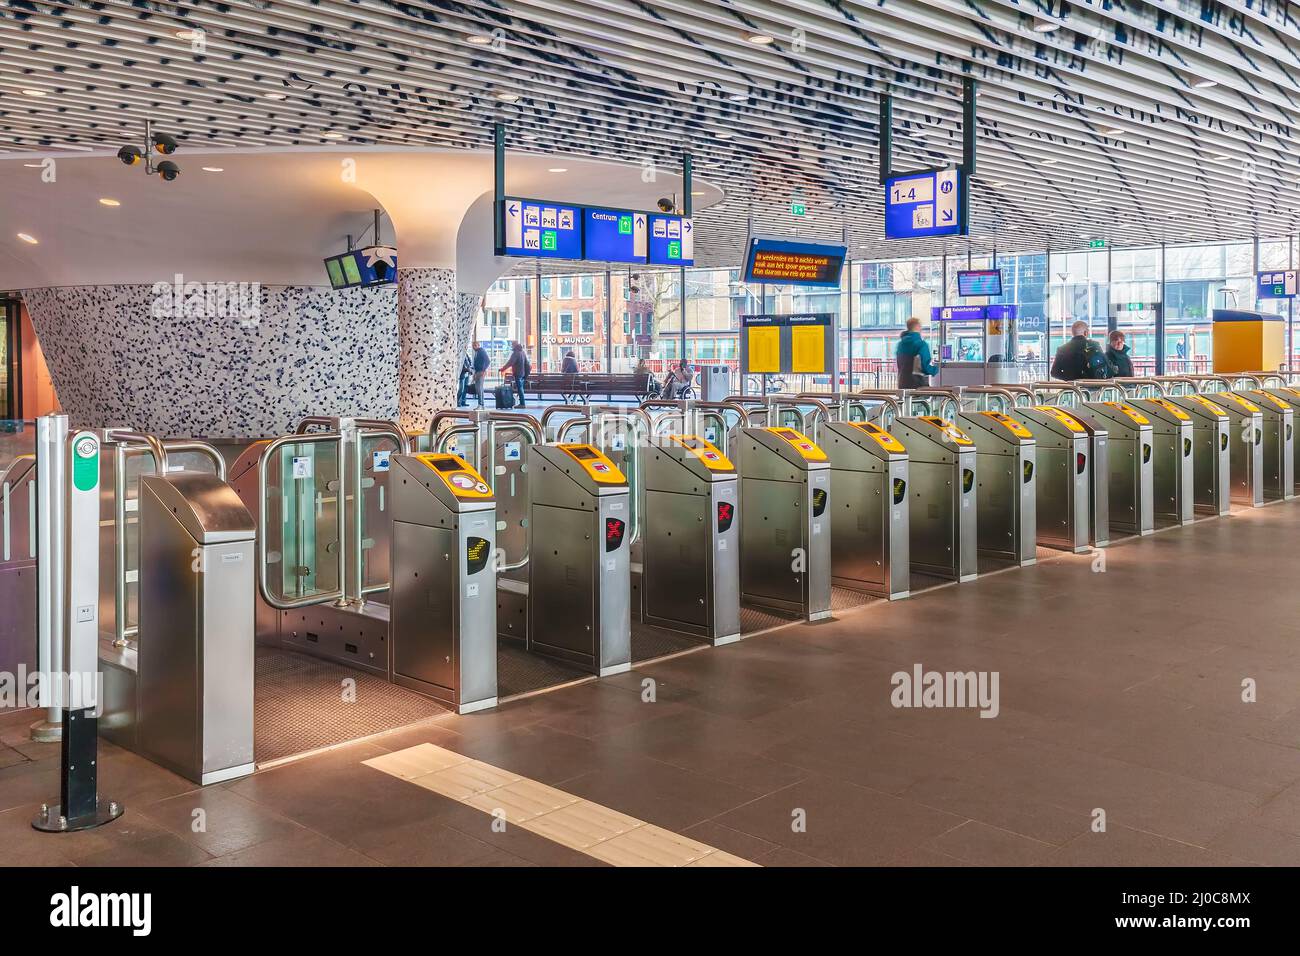 DELFT, THE NETHERLANDS - MARCH 3, 2016: The newly built train station with access gates in Delft, The Netherlands Stock Photo